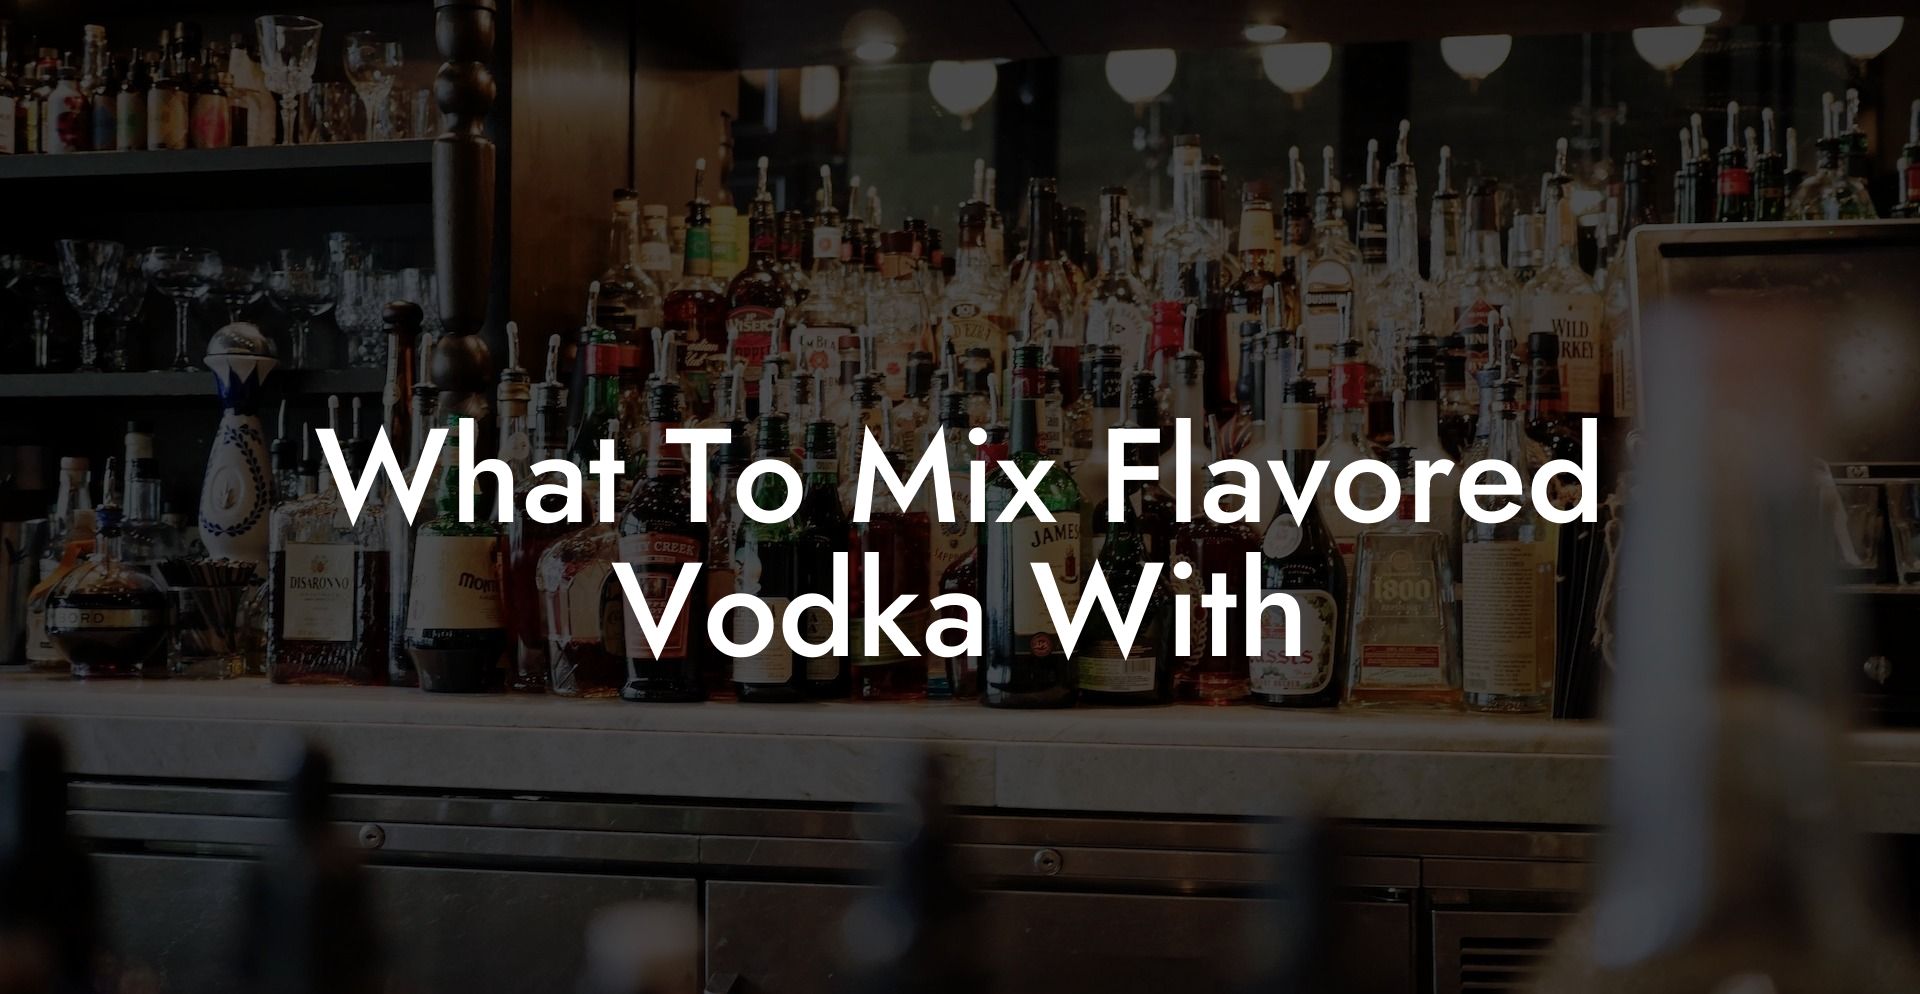 What To Mix Flavored Vodka With